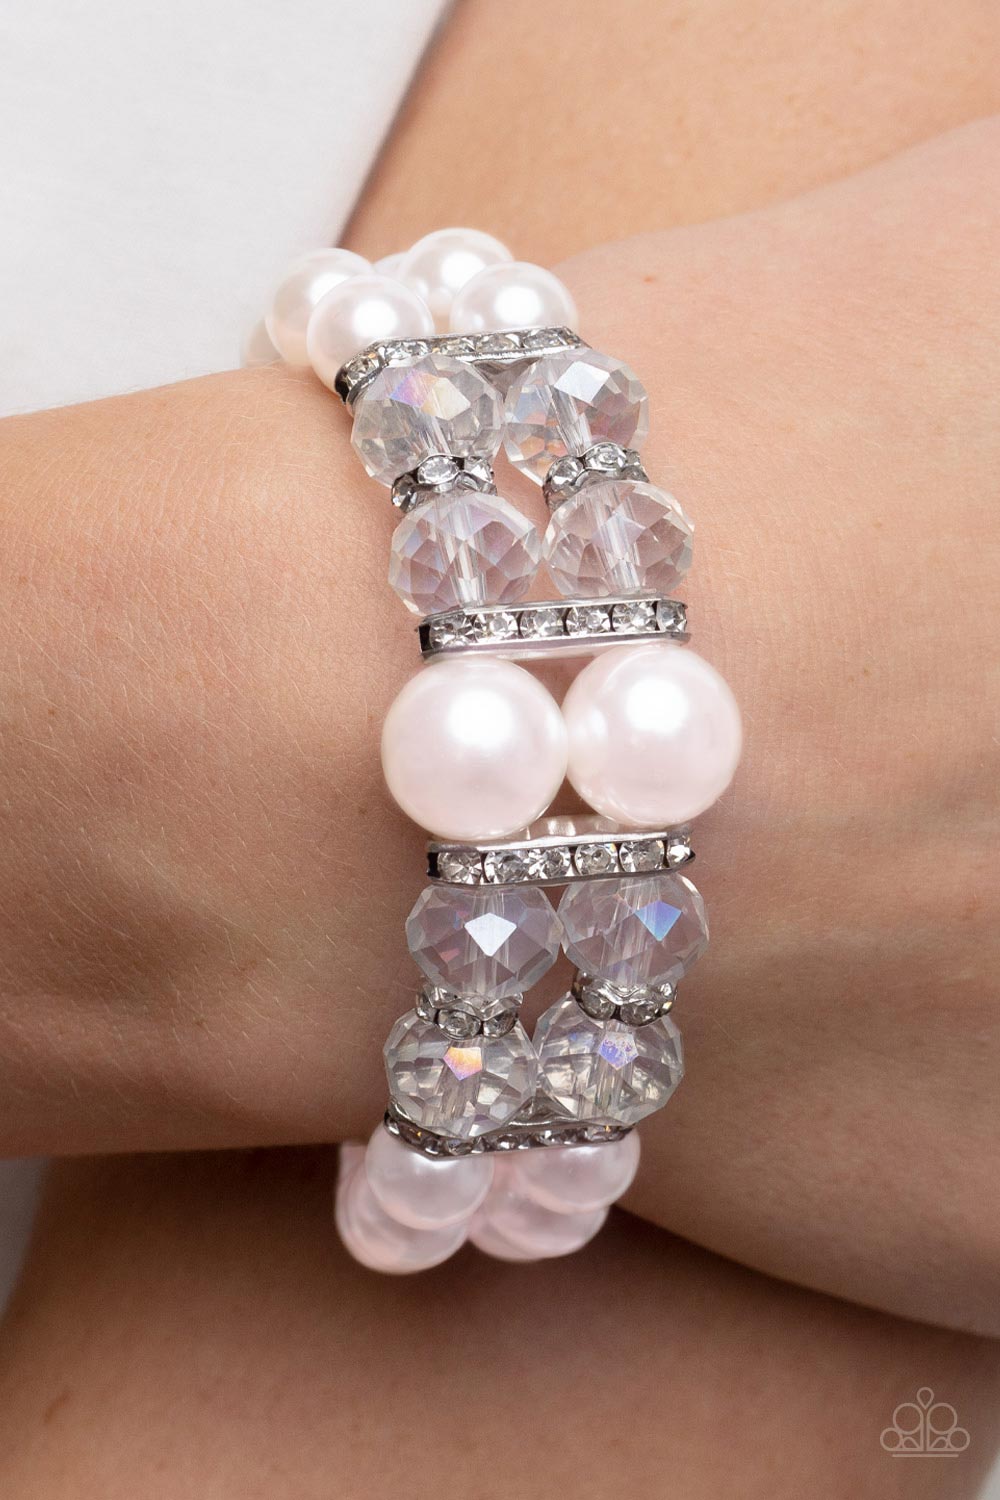 Cutely Crushing - Pink Pearl - Heart Charm Bracelet - Paparazzi Accessories